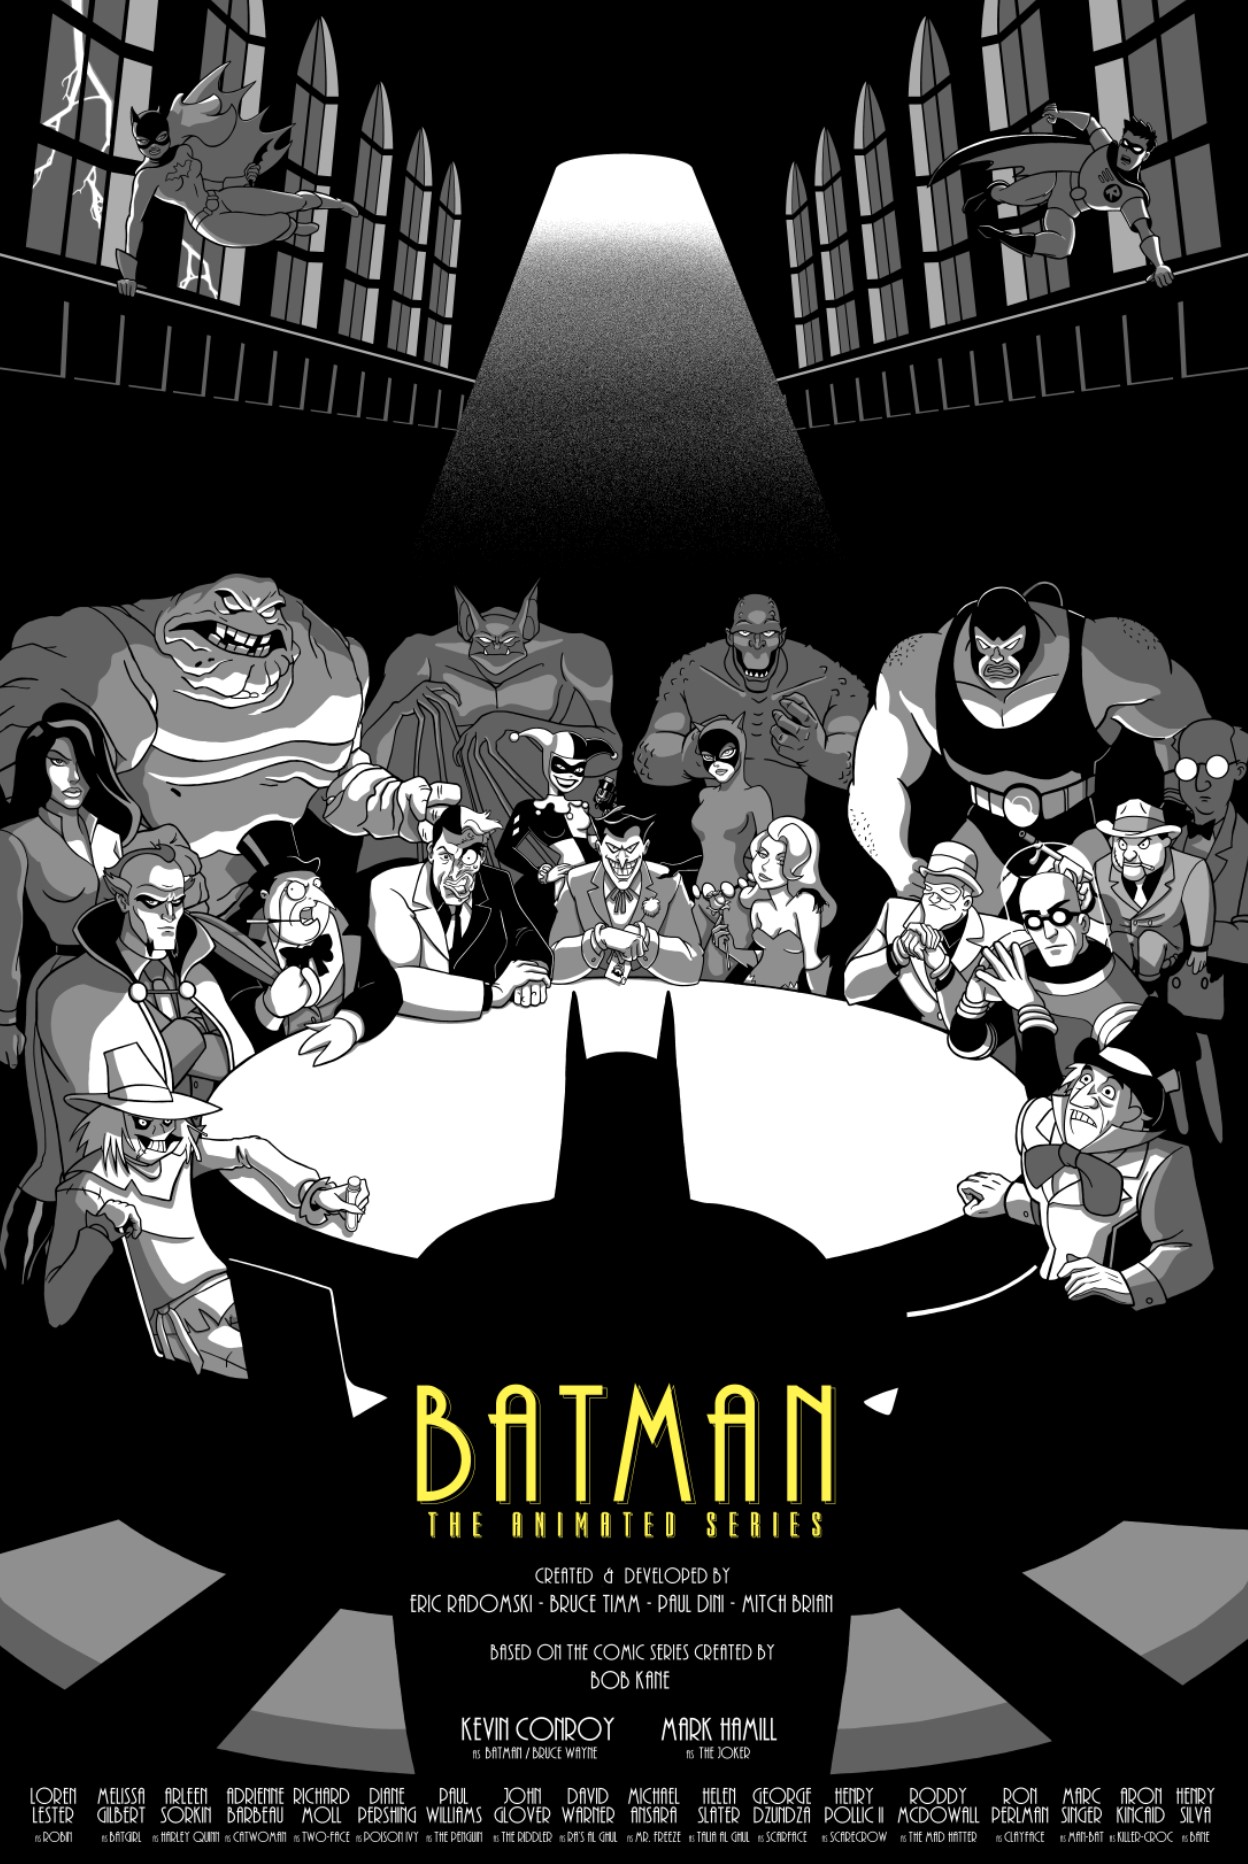 Batman: The Animated Series “The AA Meeting” 24x36 15 colour reg and 5  colour variant with GID and yellow gloas varnish screenprint - PosterSpy